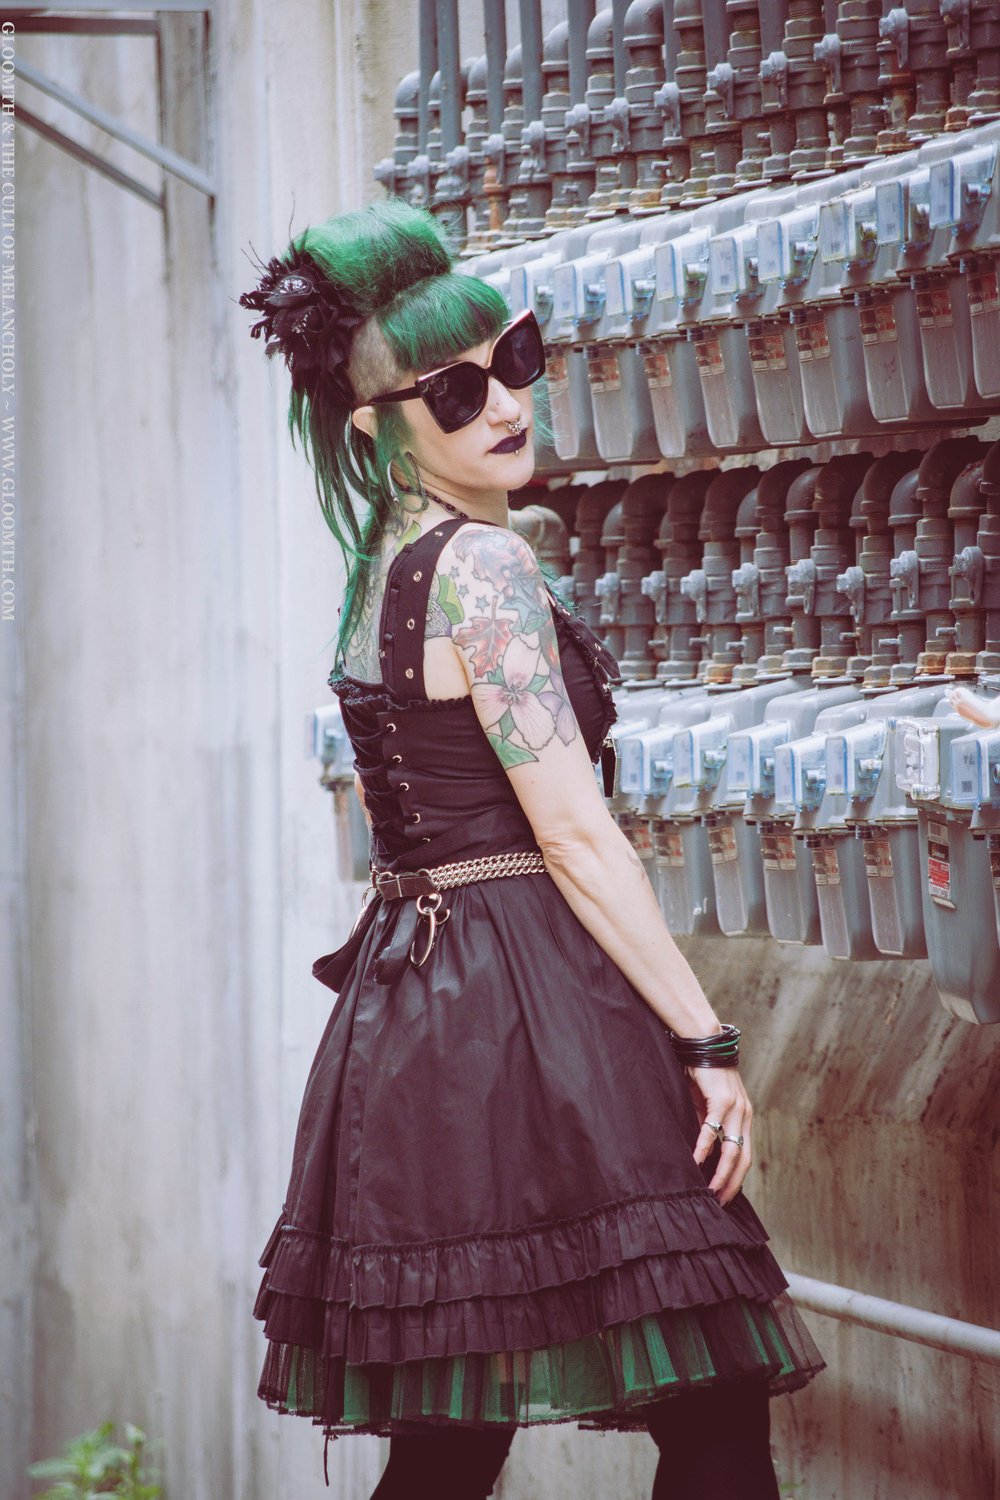 Weaponized Spiked Black Cotton Gothic JSK Dress — Gloomth